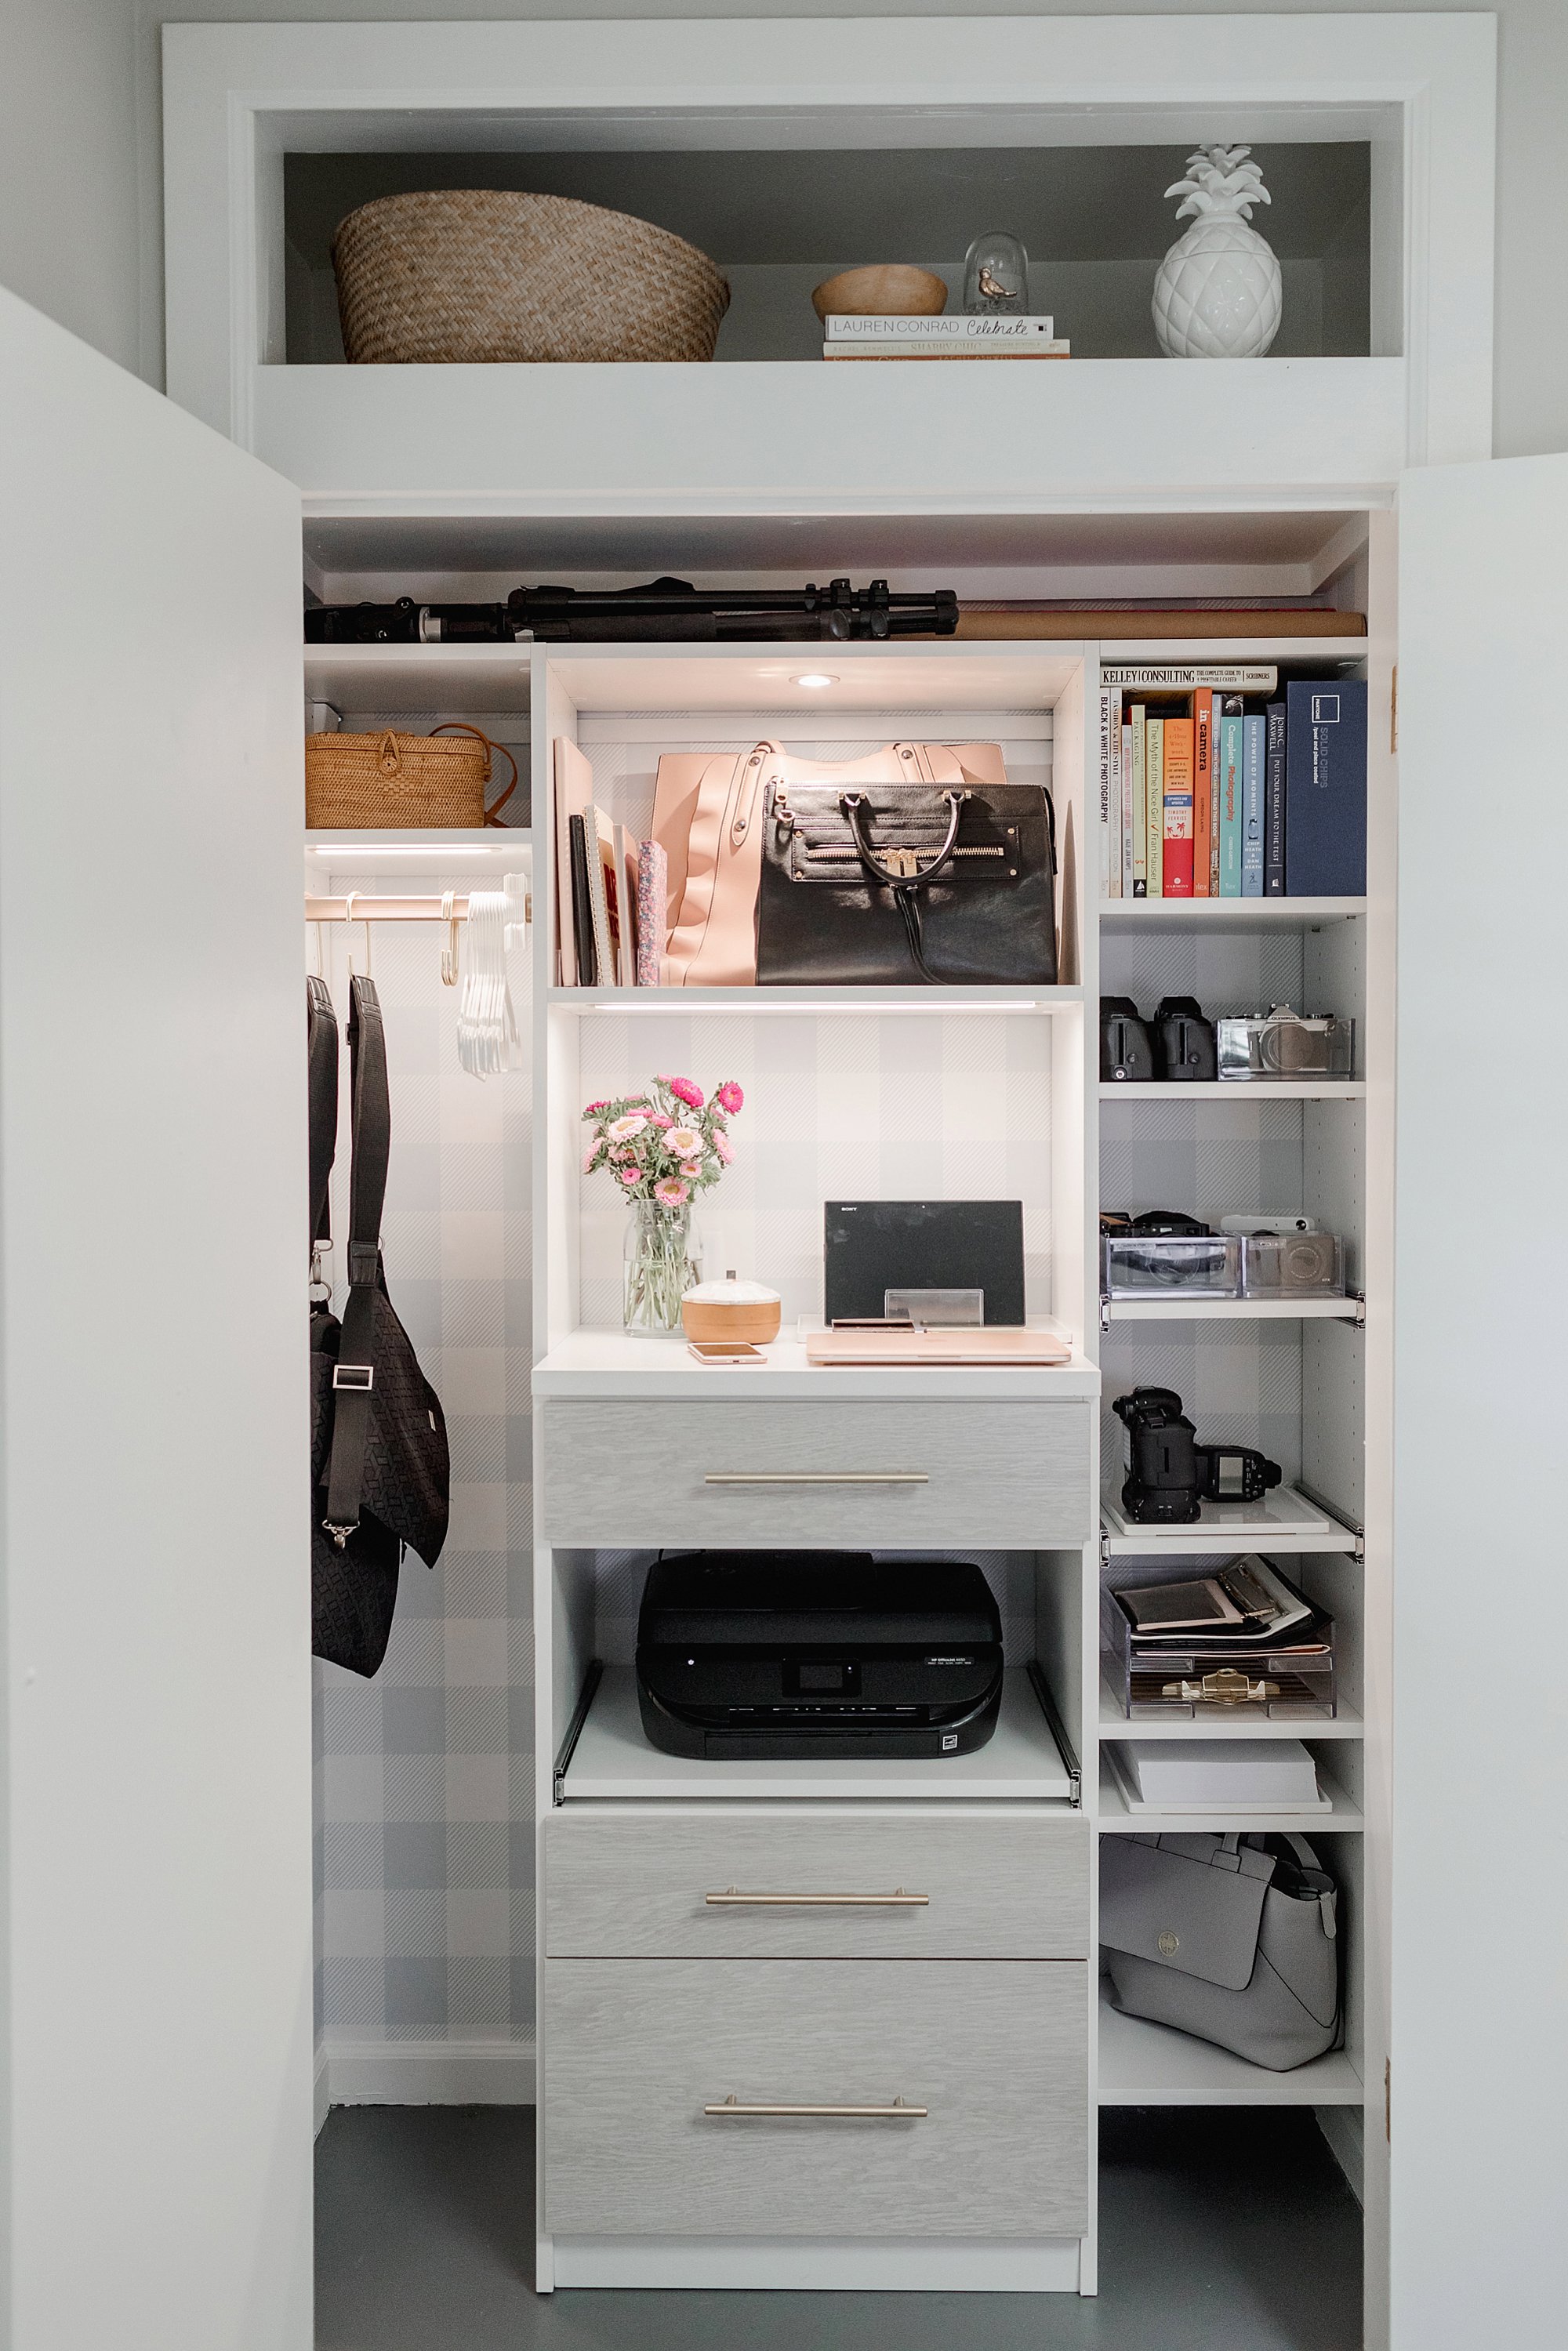 final reveal of office closet reveal belonging to photographer blogger Diana Elizabeth in phoenix arizona. created by California closets and with removable buffalo check wallpaper #office #closet #wallpaper #organization #lensorganization #lensdrawer